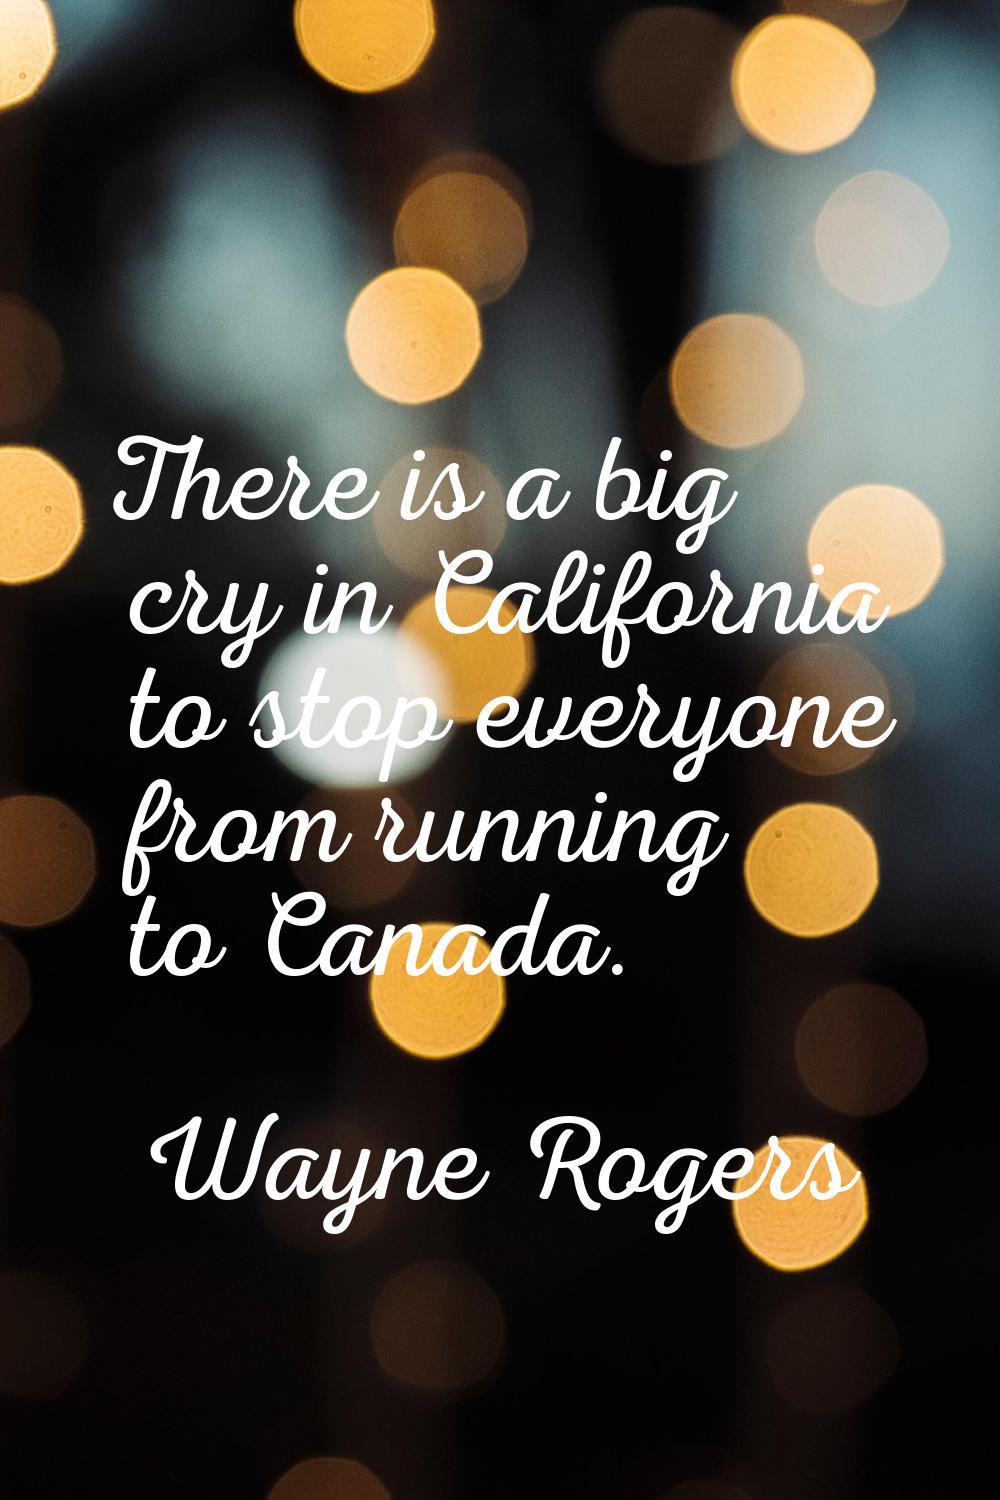 There is a big cry in California to stop everyone from running to Canada.